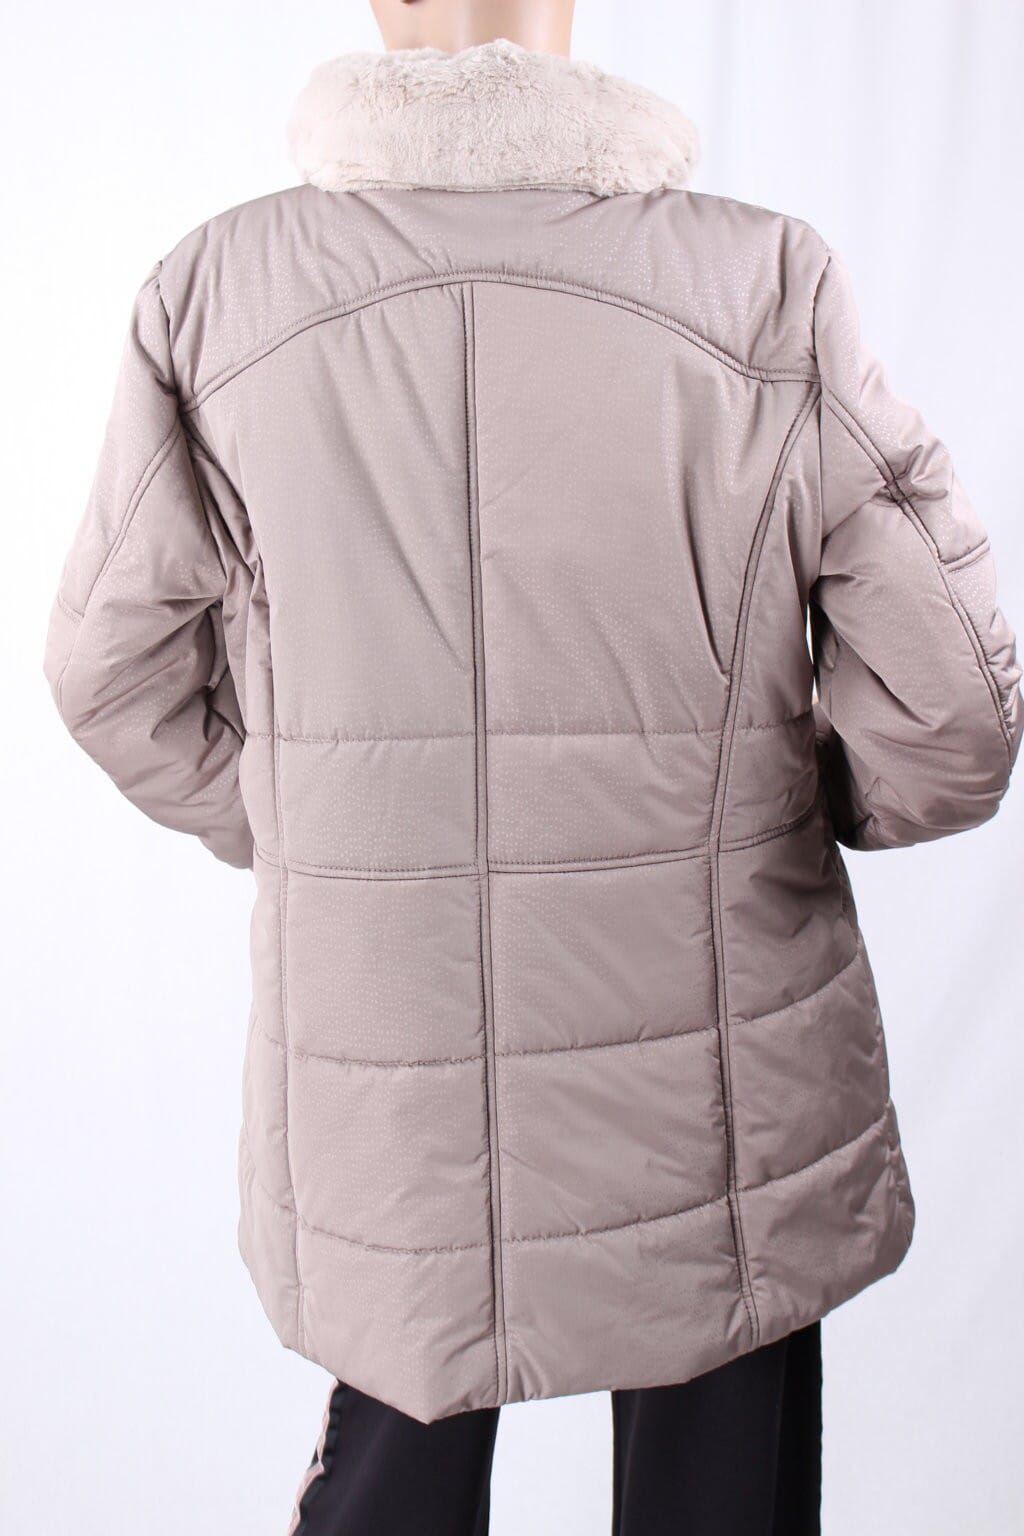 Down Jacket With Fur Canasport ConceptK